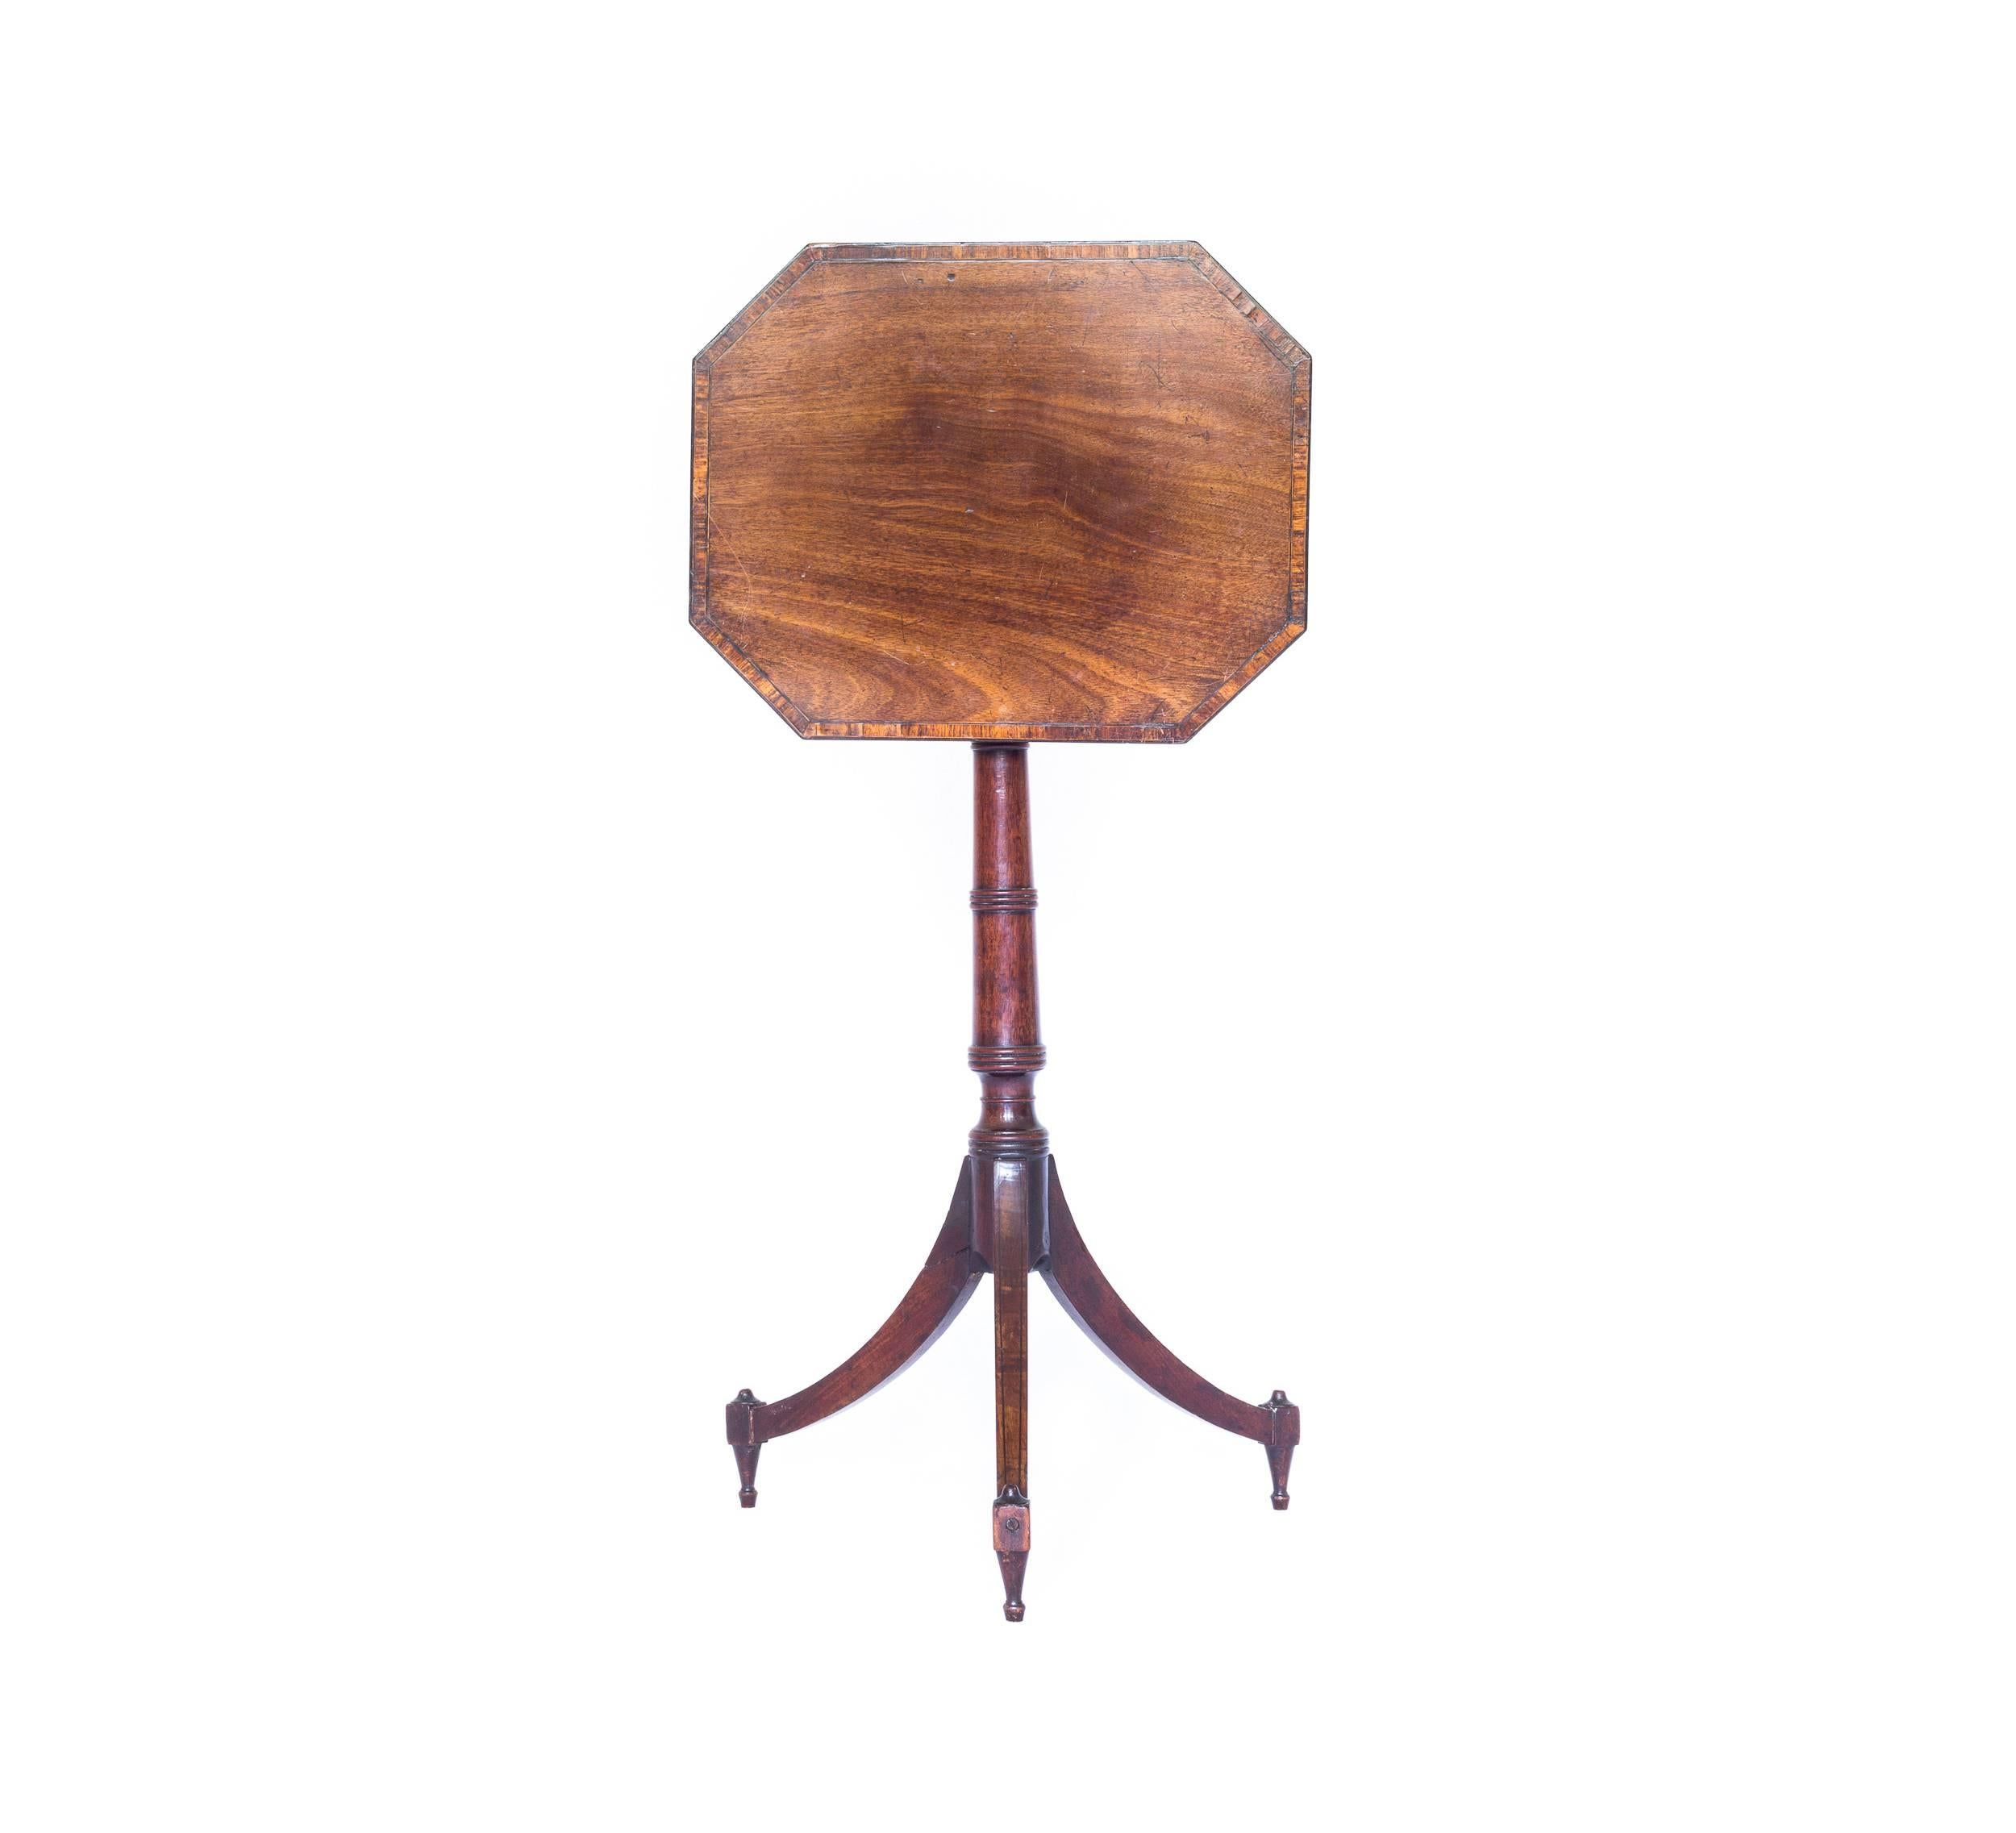 An unusual George III Sheraton period small telescopic table in mahogany, adjustable in height, of particularly elegant design, closely related to the Gillows sketch, dated 1792. English, c. 1790's

This delightful little telescopic table has the